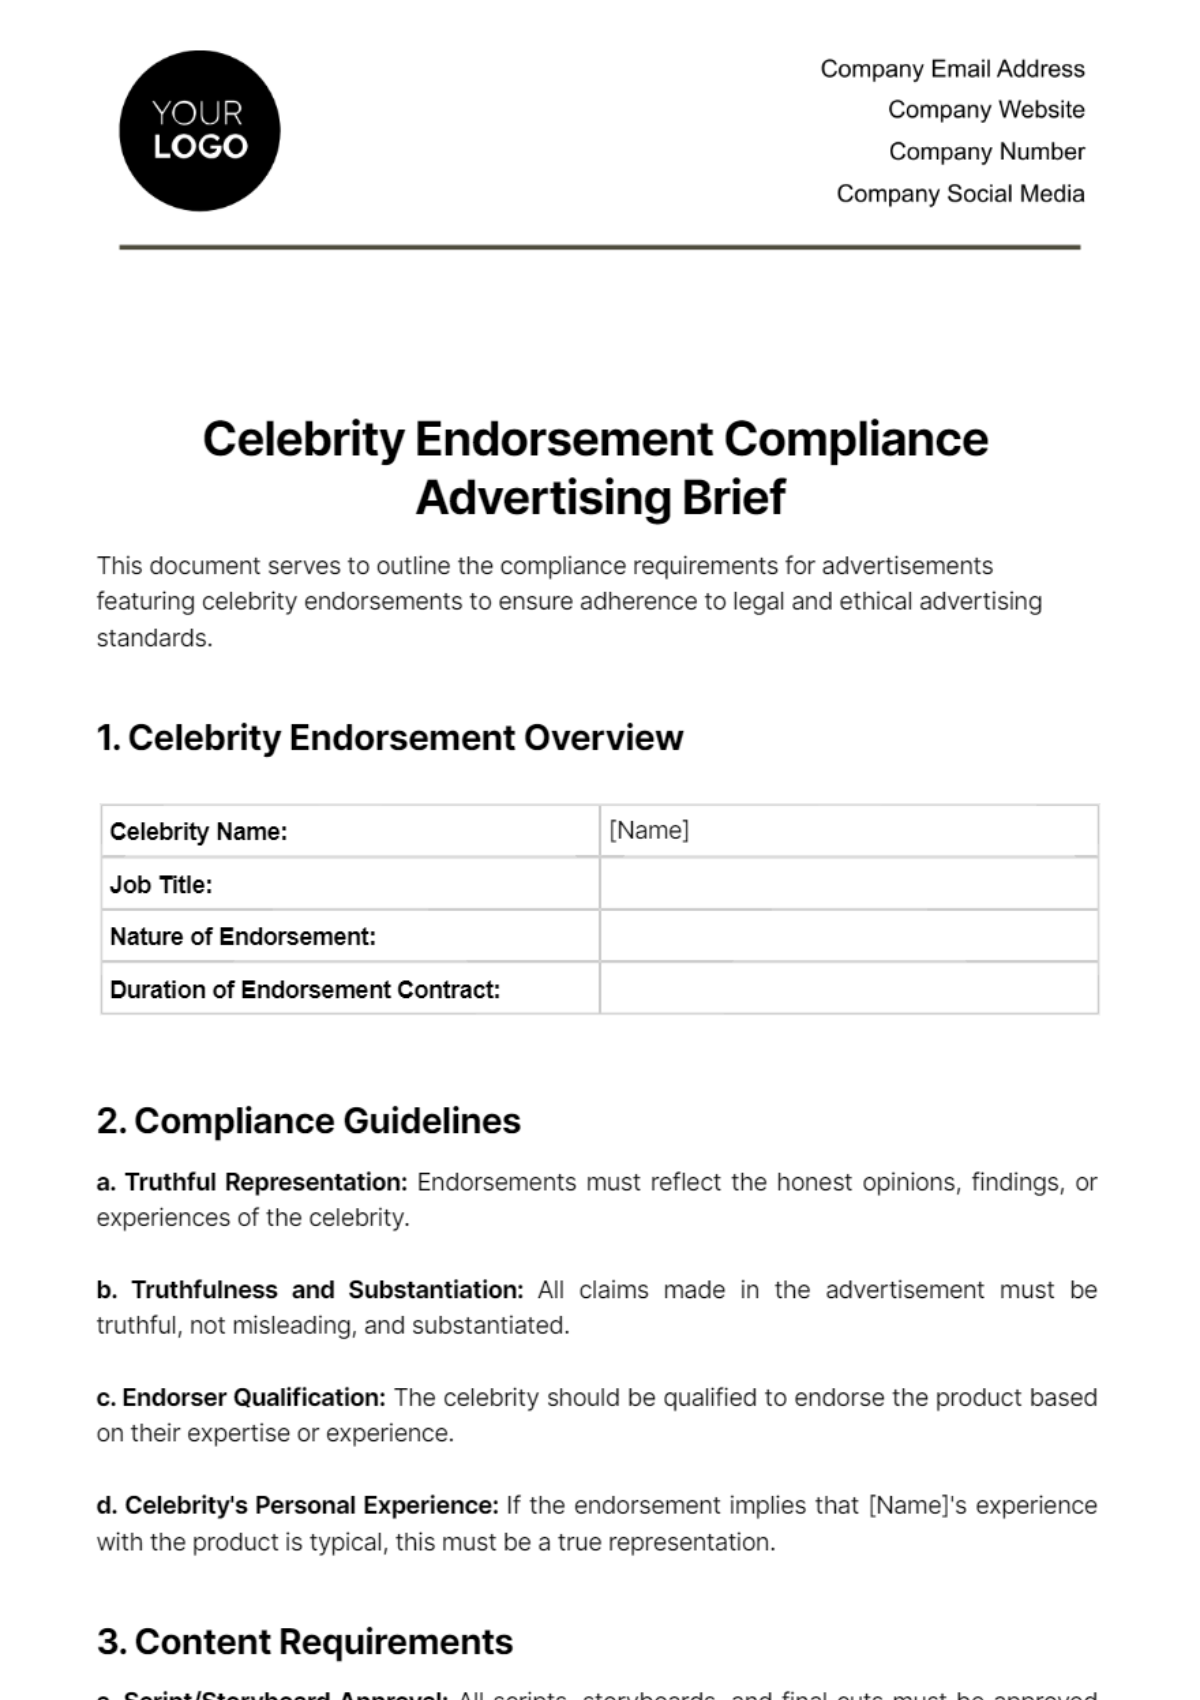 Free Celebrity Endorsement Compliance Advertising Brief Template